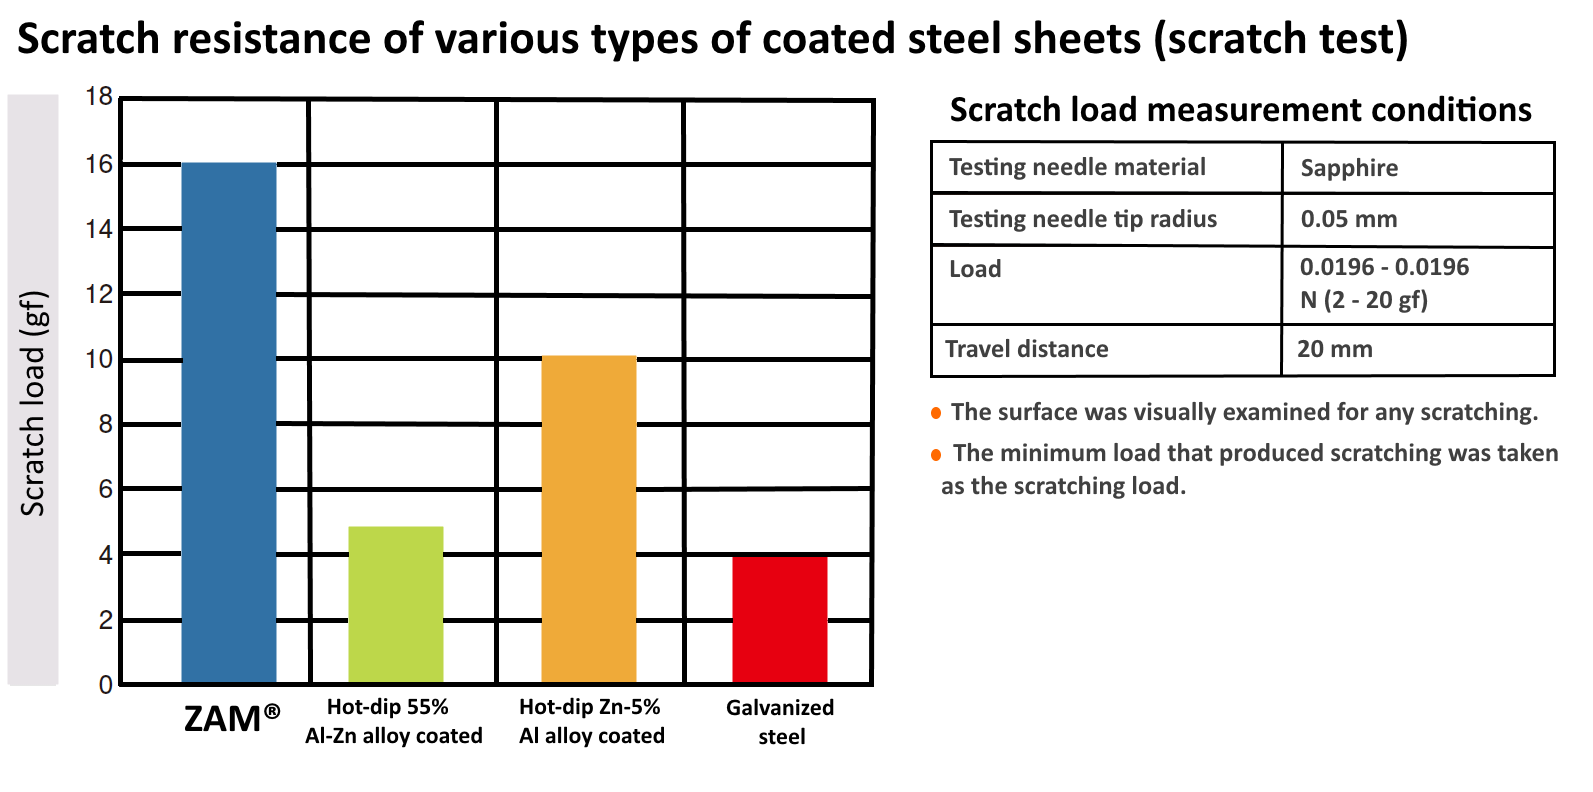 Graph showing scratch resistance of ZAM vs. other types of coated steel in scratch test